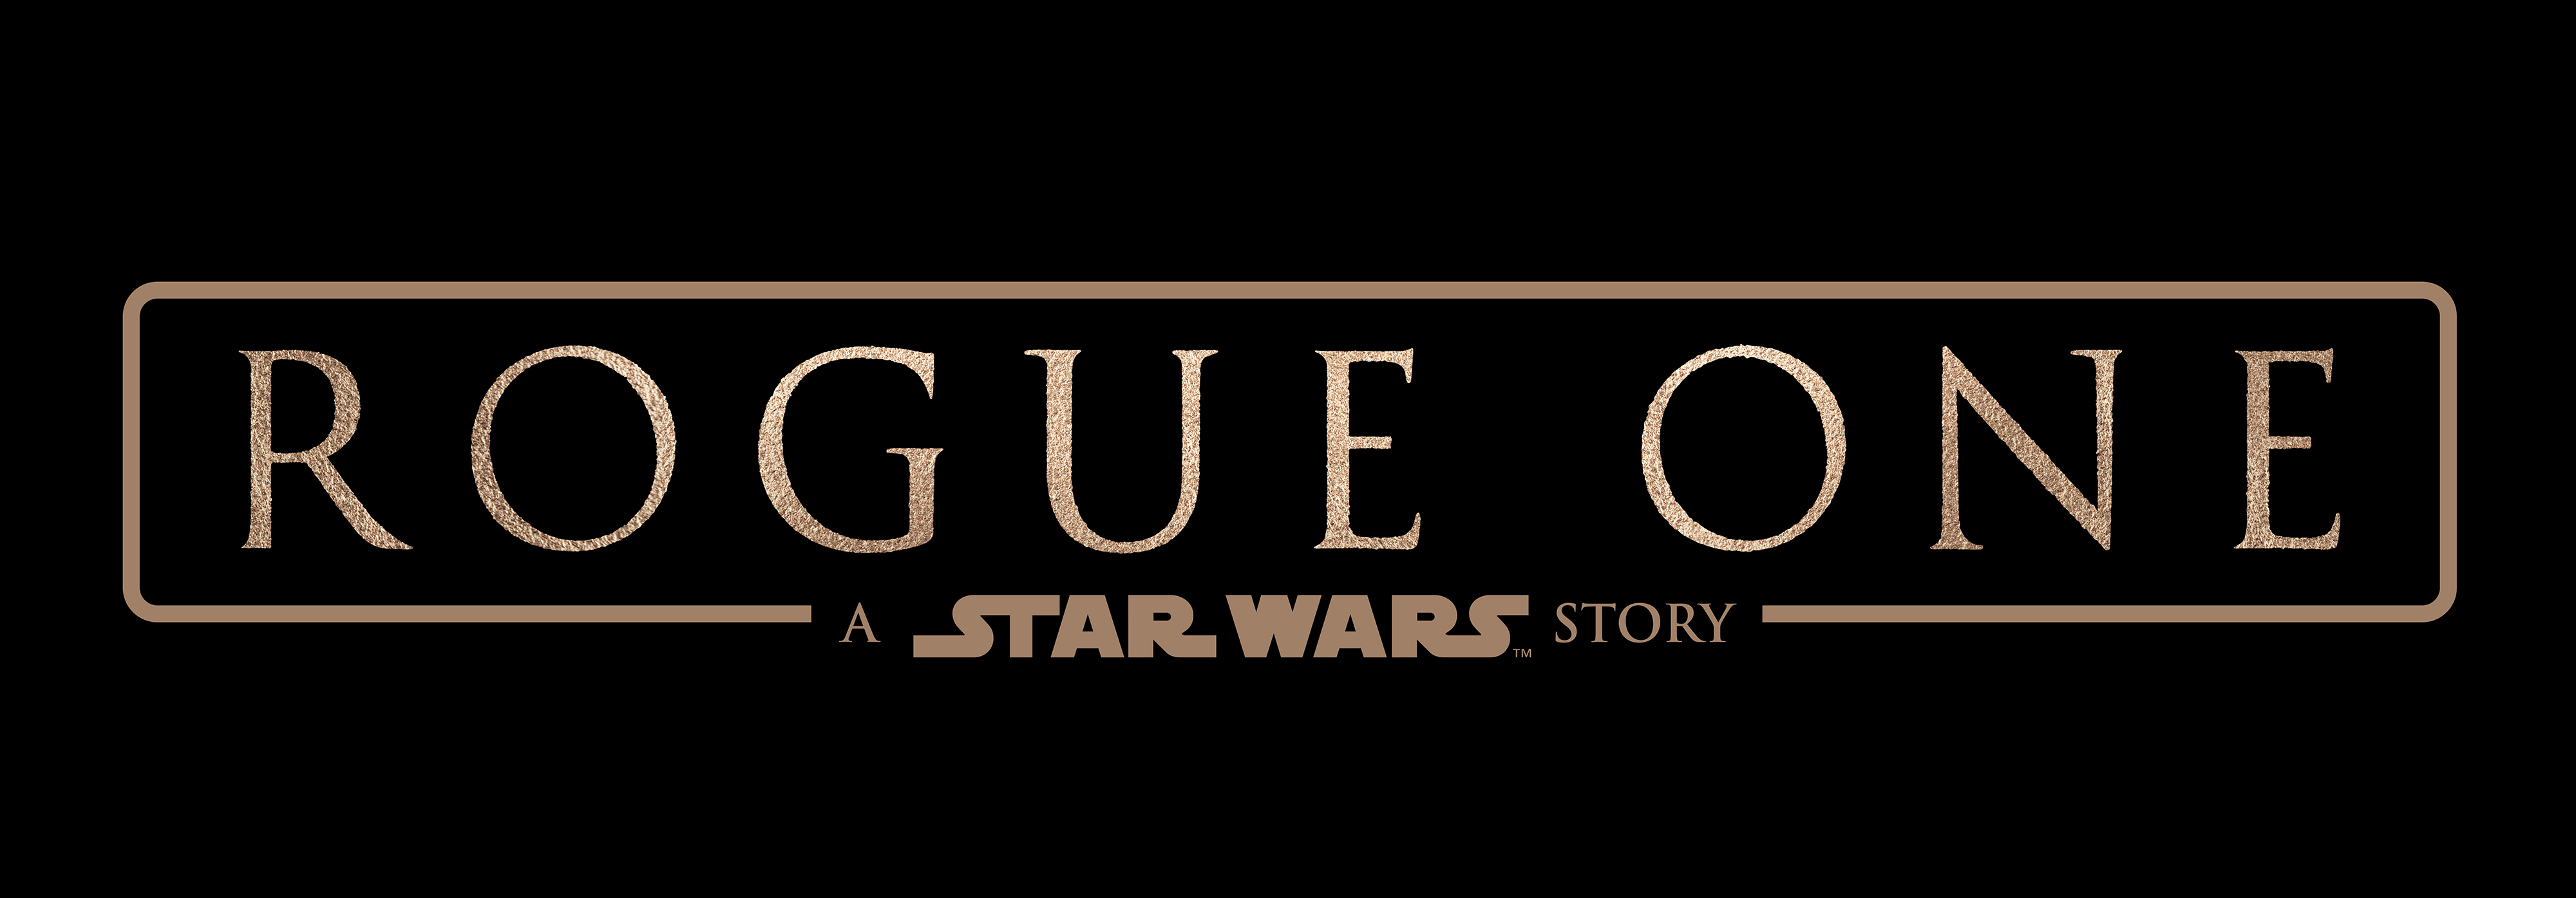 Movie Rogue One A Star Wars Story 4000x1395